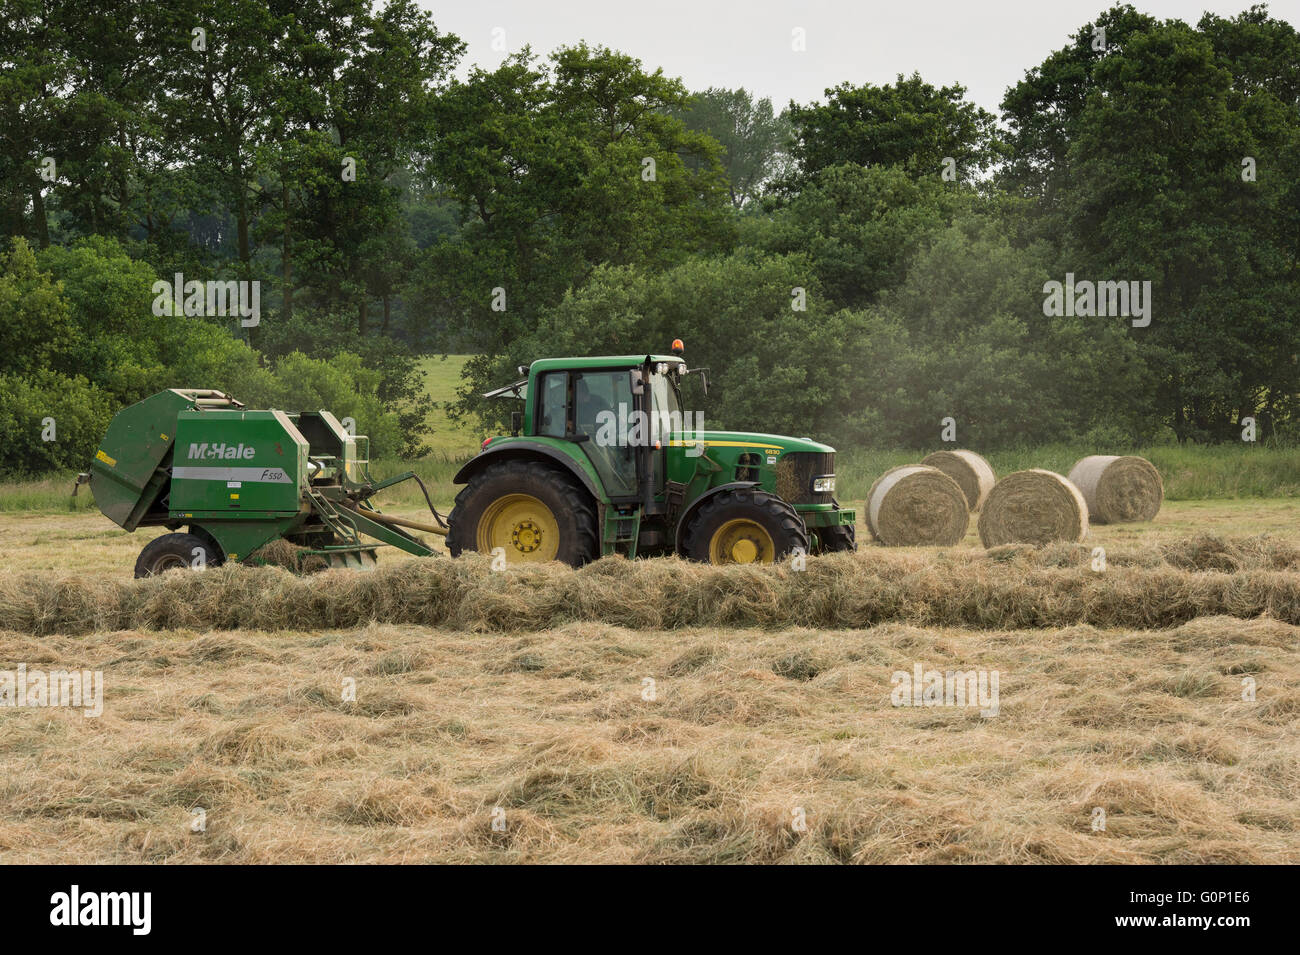 Green farm tractor working in a field, silage or hay making, pulling round baler (4 cylindrical bales beyond) - Great Ouseburn, North Yorkshire, GB. Stock Photo